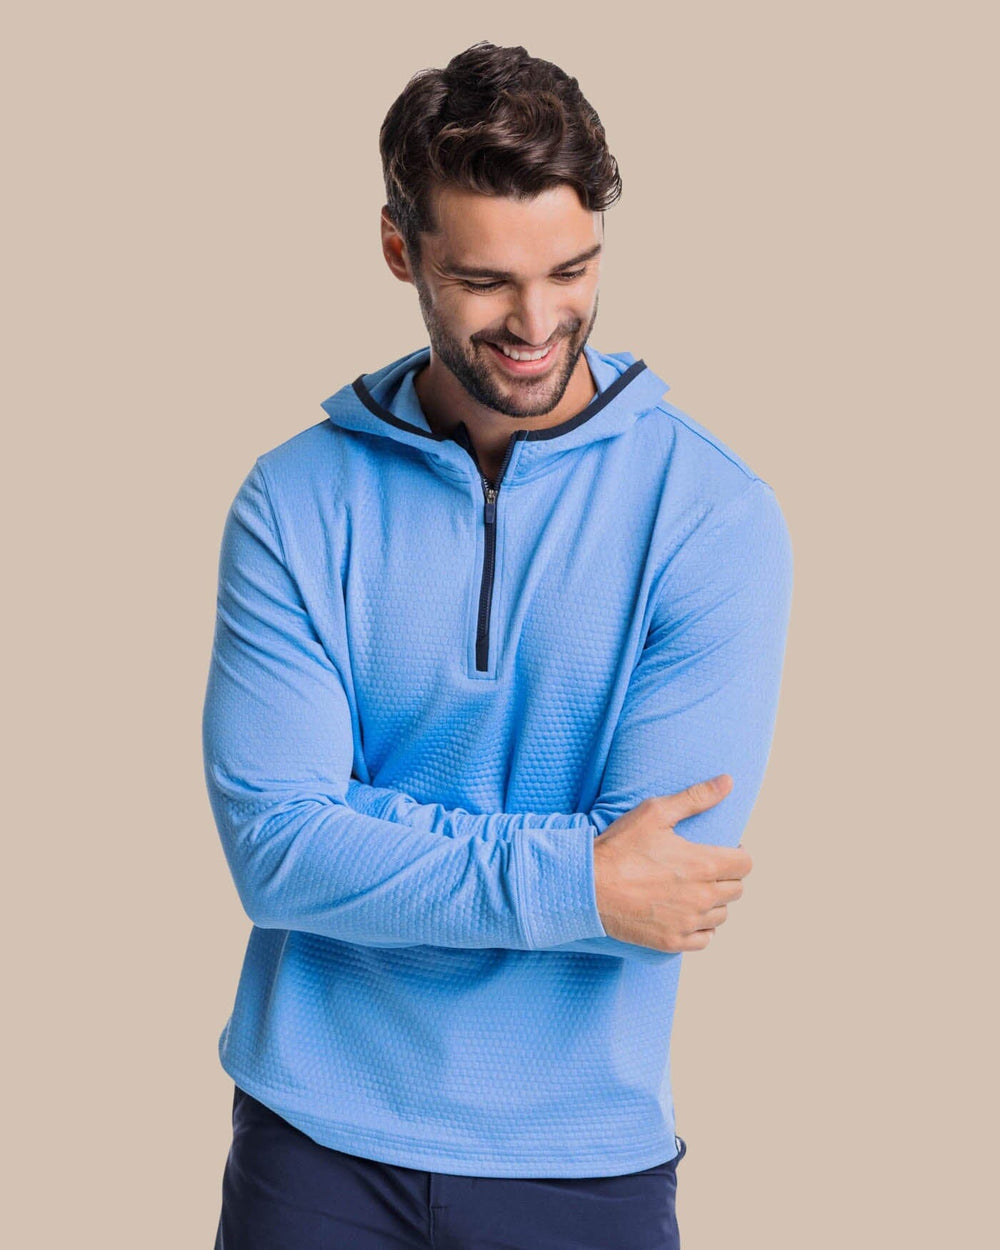 The front view of the Southern Tide Scuttle Heather Performance Quarter Zip Hoodie by Southern Tide - Heather Boat Blue